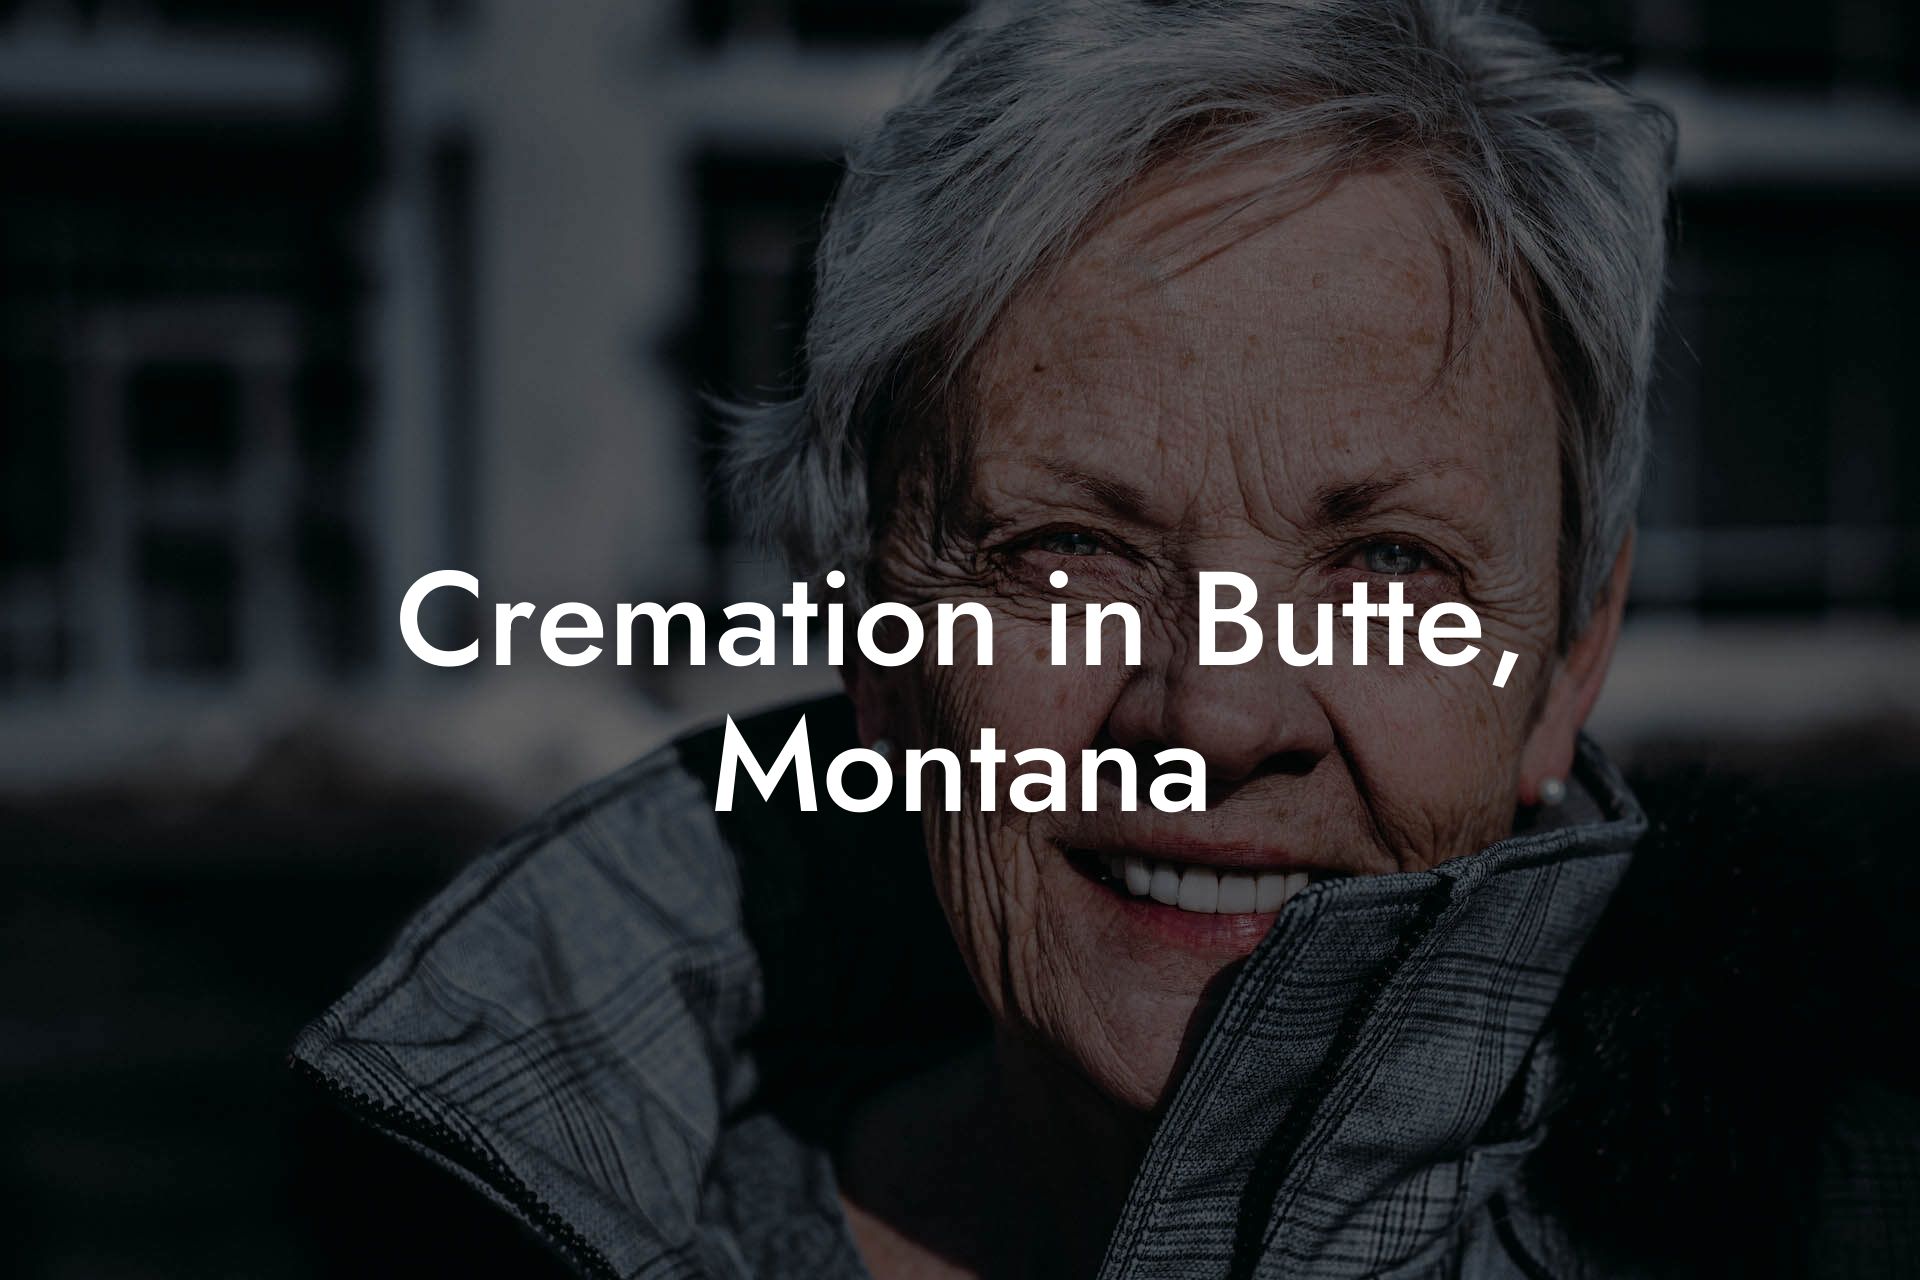 Cremation in Butte, Montana